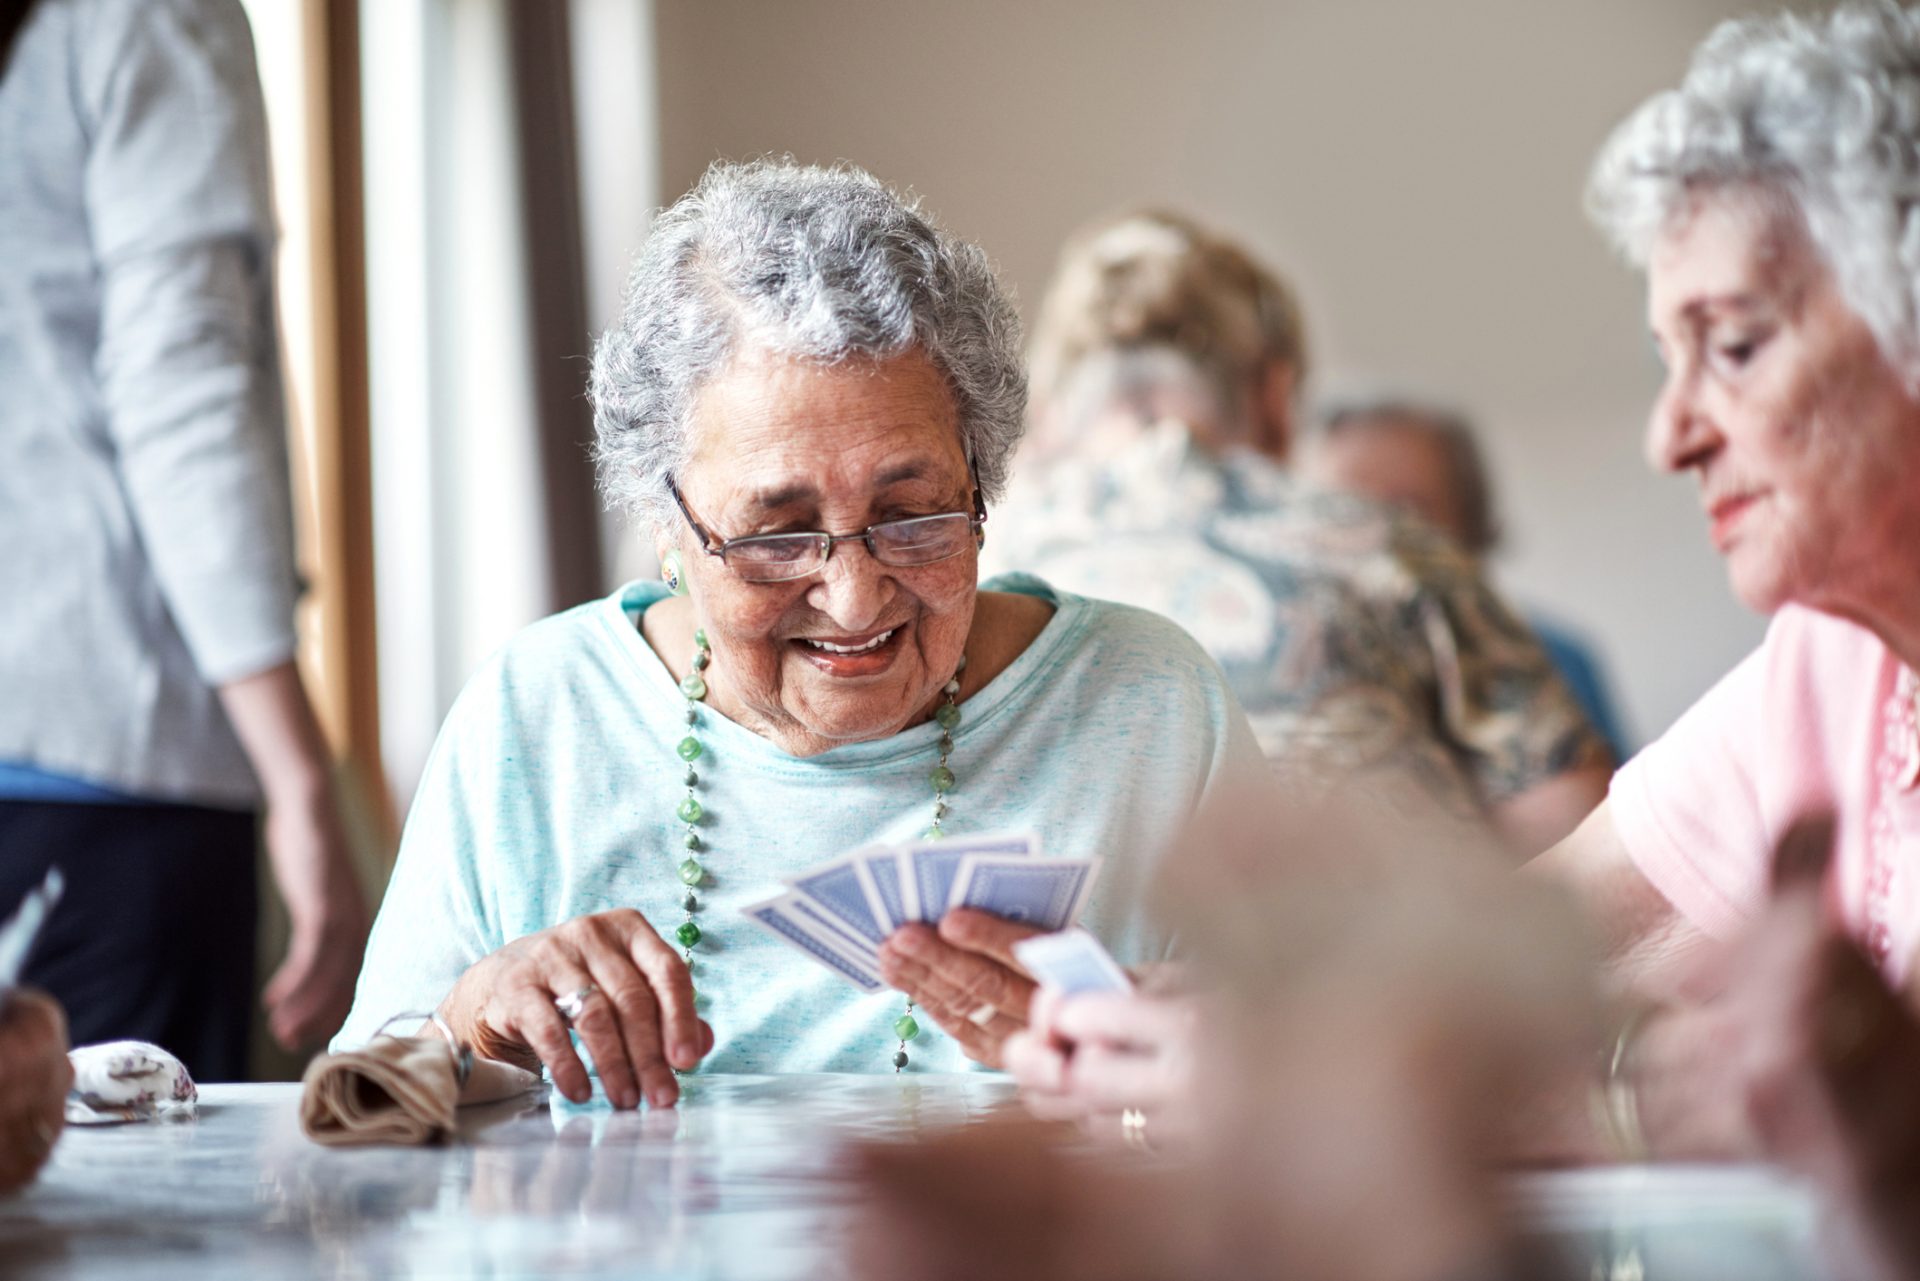 Senior residents enjoying a card game at their community center in a bright and cheerful room.